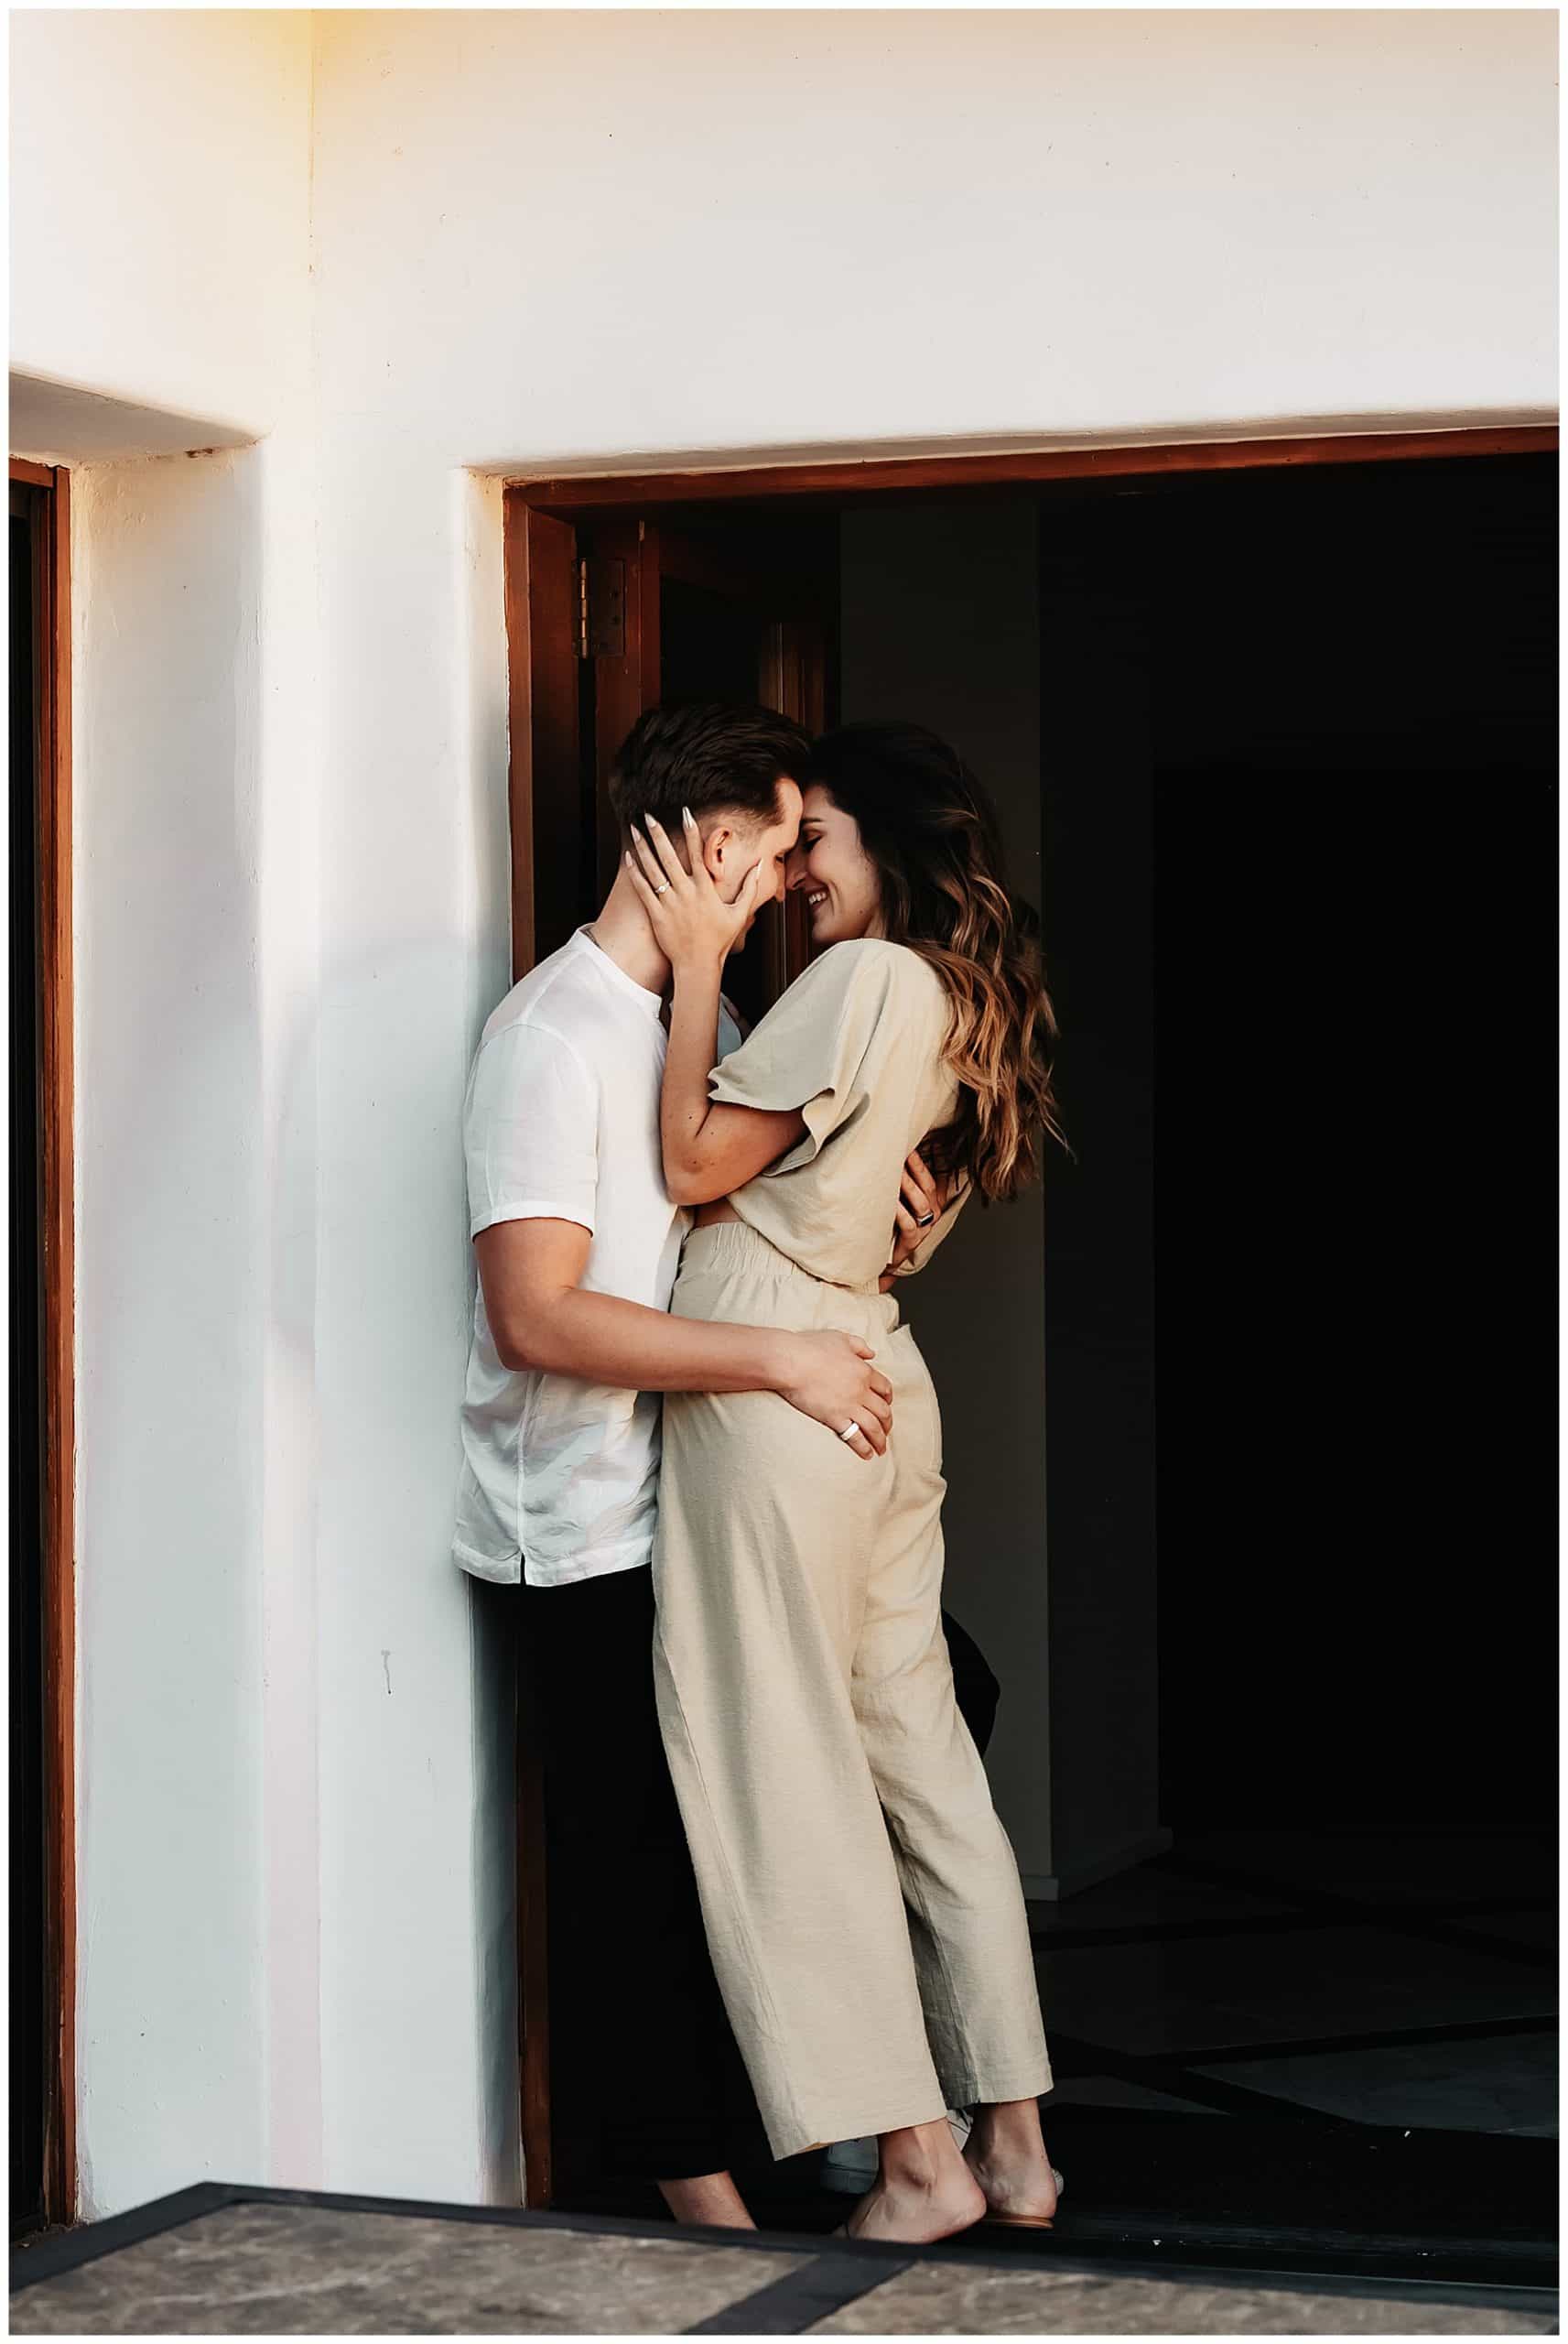 Couple-kissing-against-house-wall